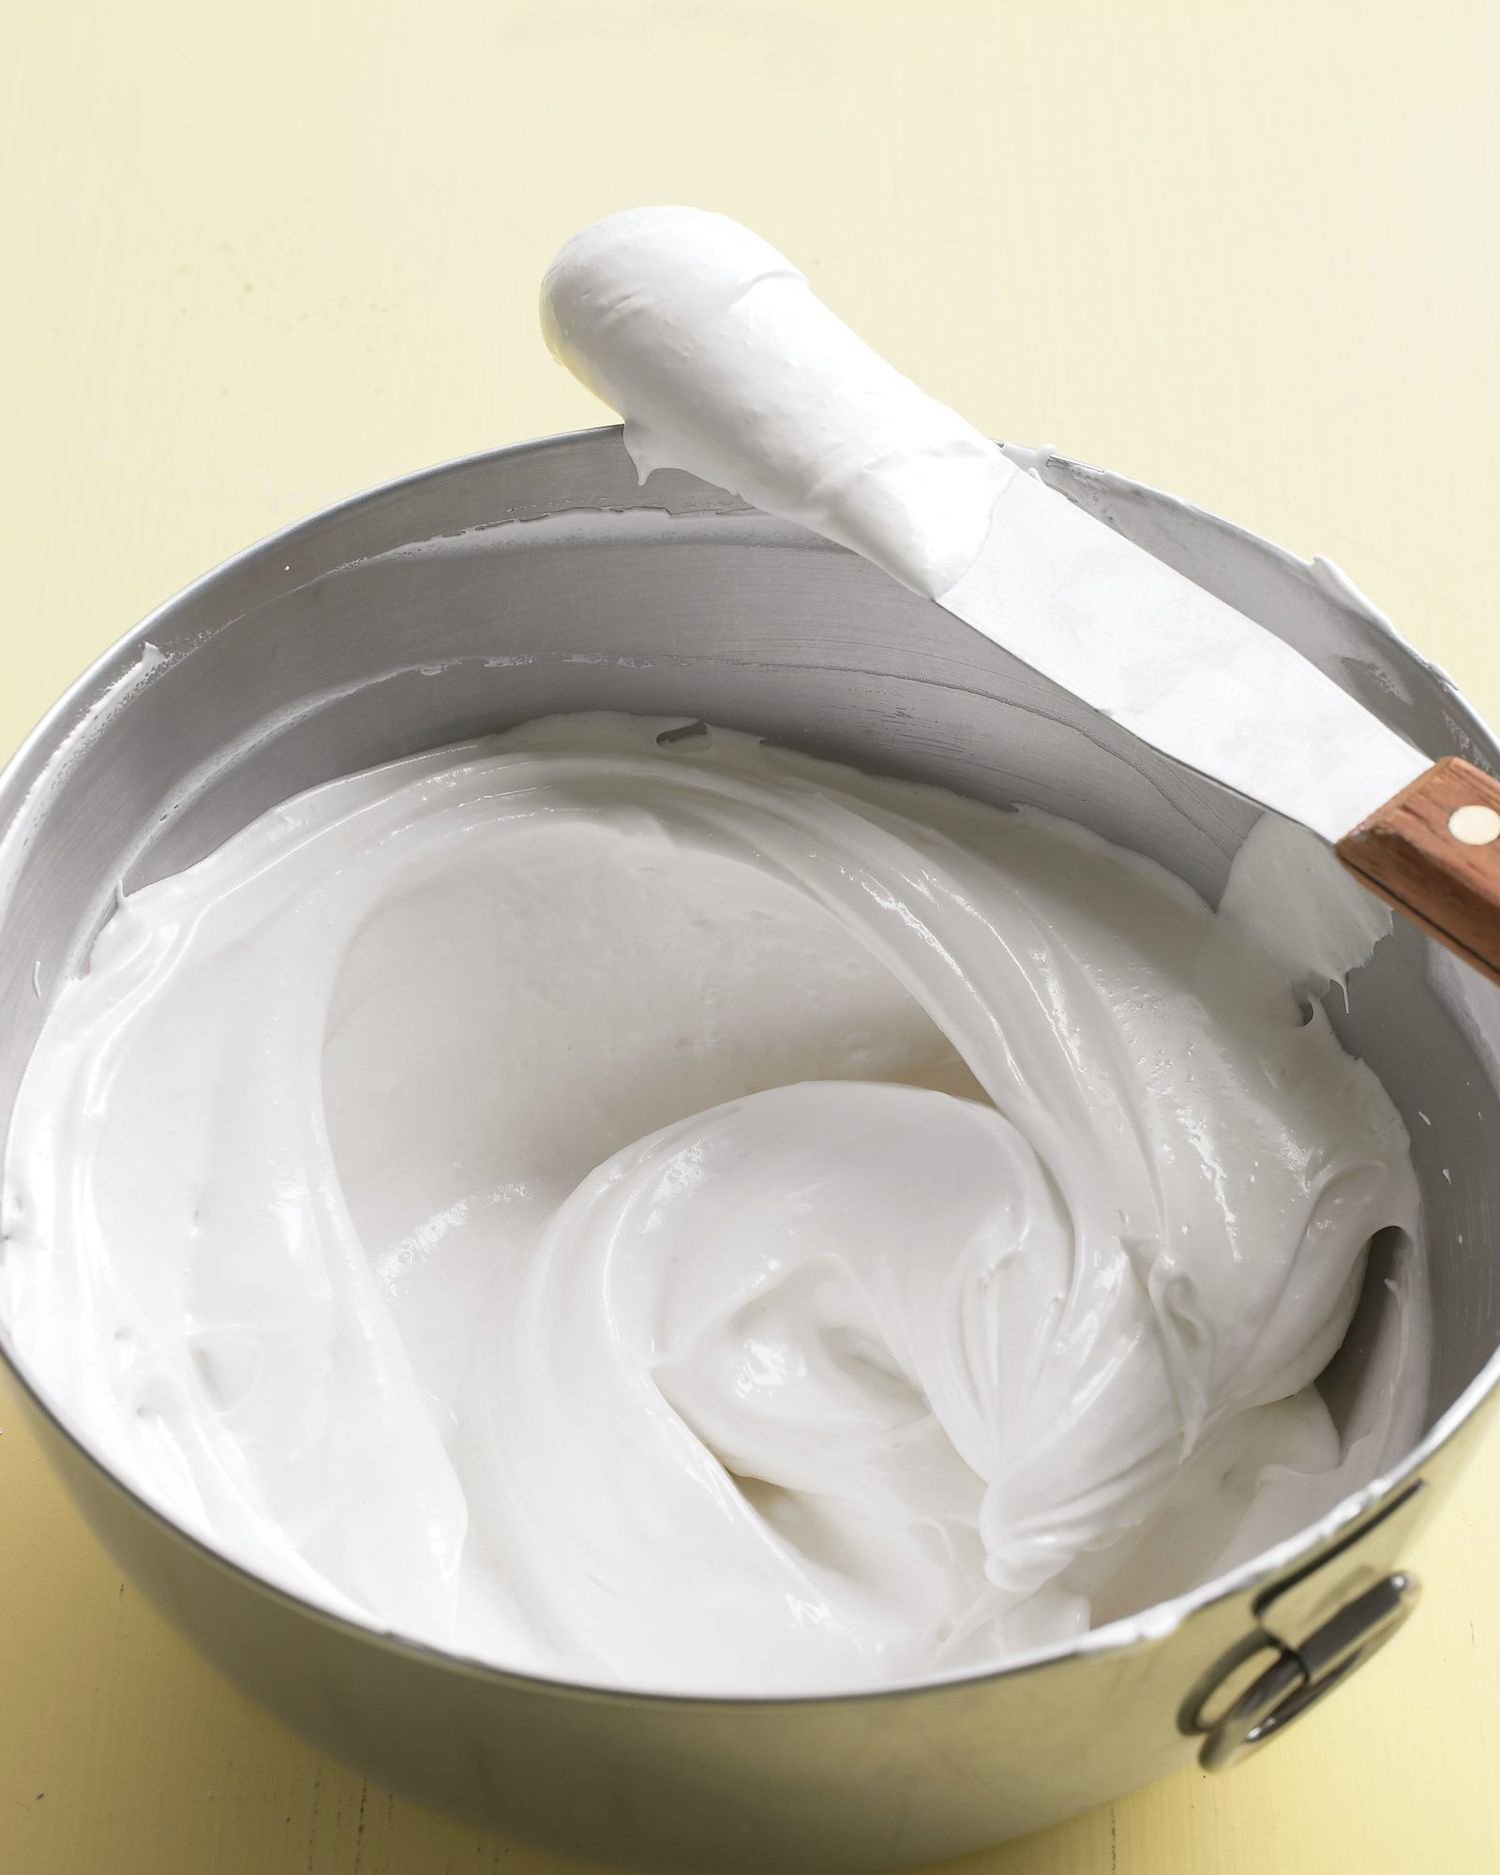 Whipped Frosting